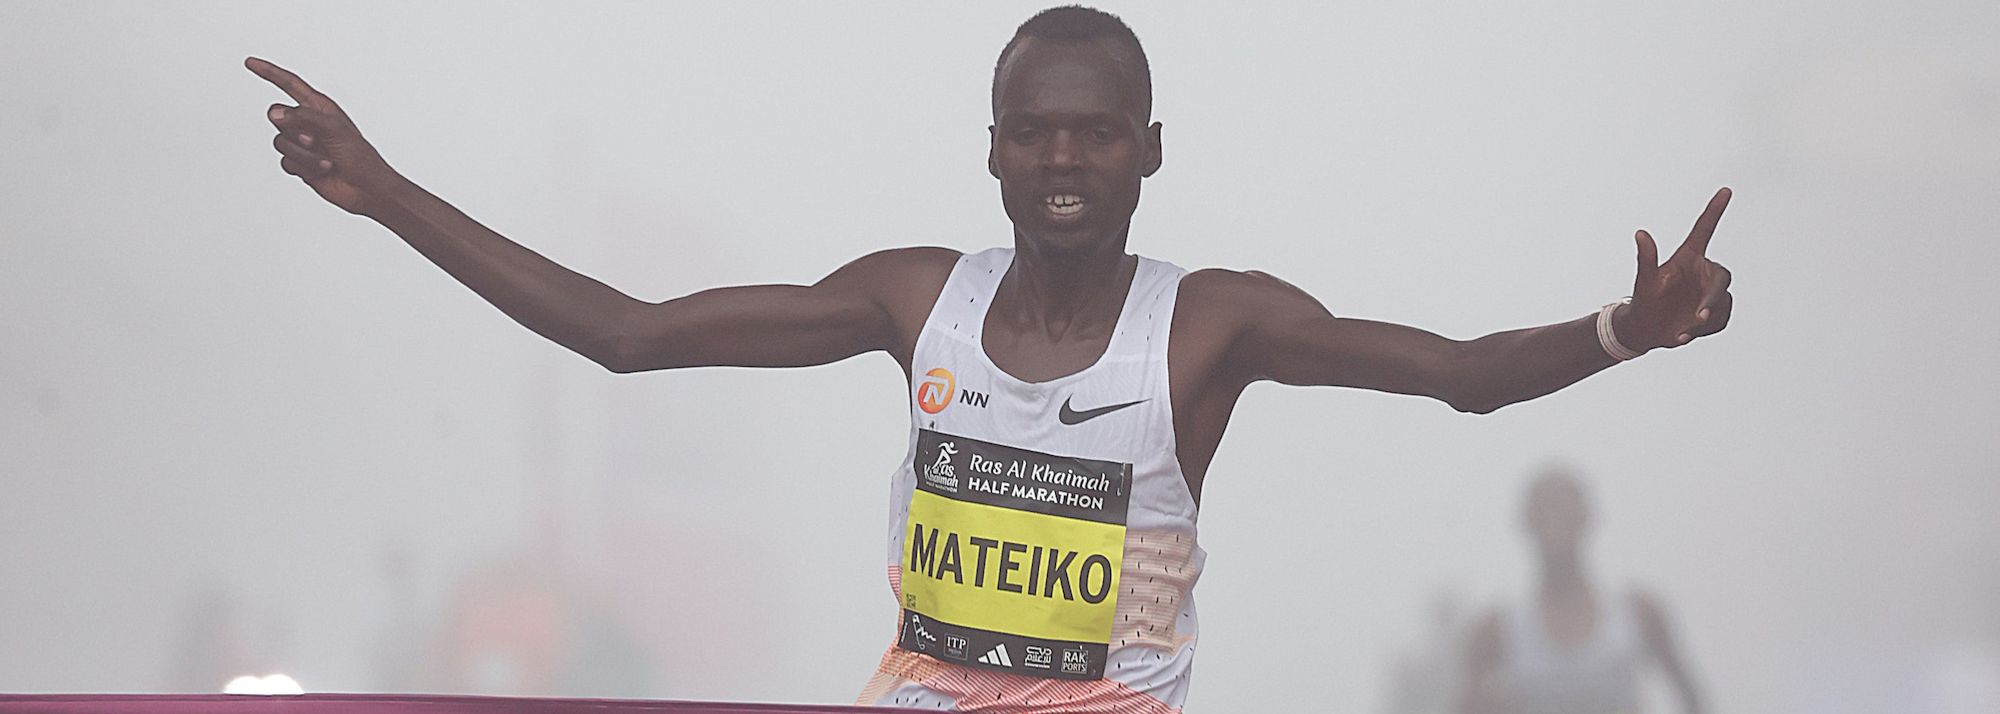 Daniel Mateiko and Tsigie Gebreselama were victorious at the World Athletics Gold Label road race